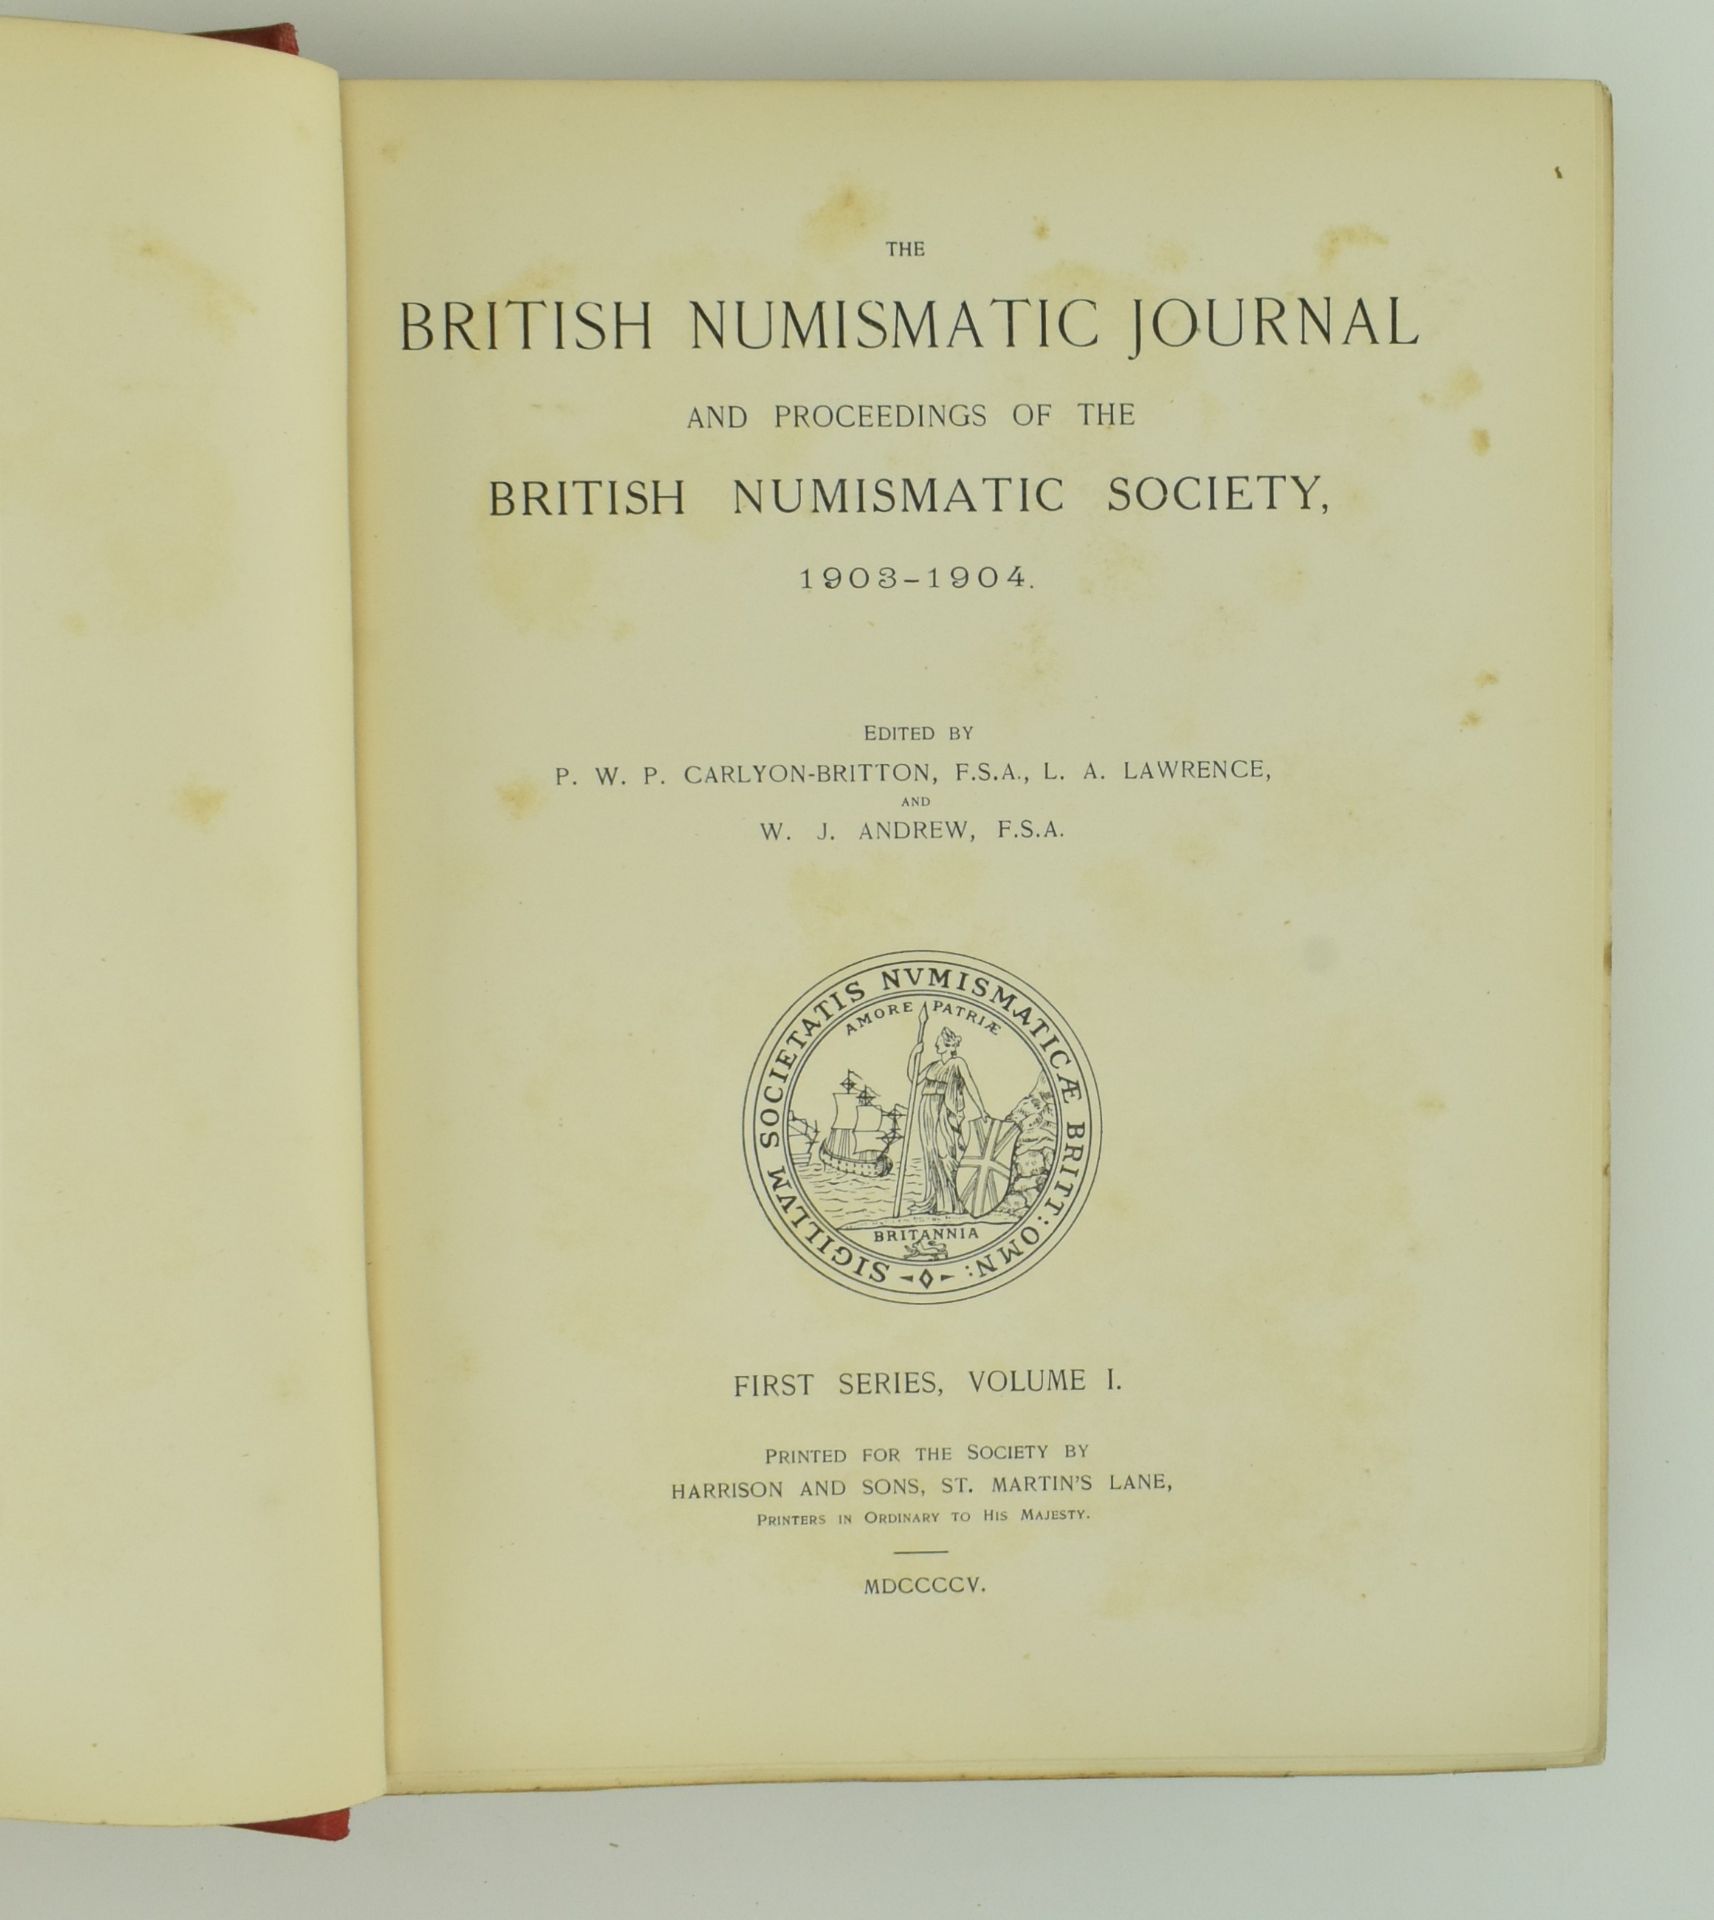 1905 THE BRITISH NUMISMATIC JOURNAL FIRST SERIES VOL I & II - Image 3 of 8